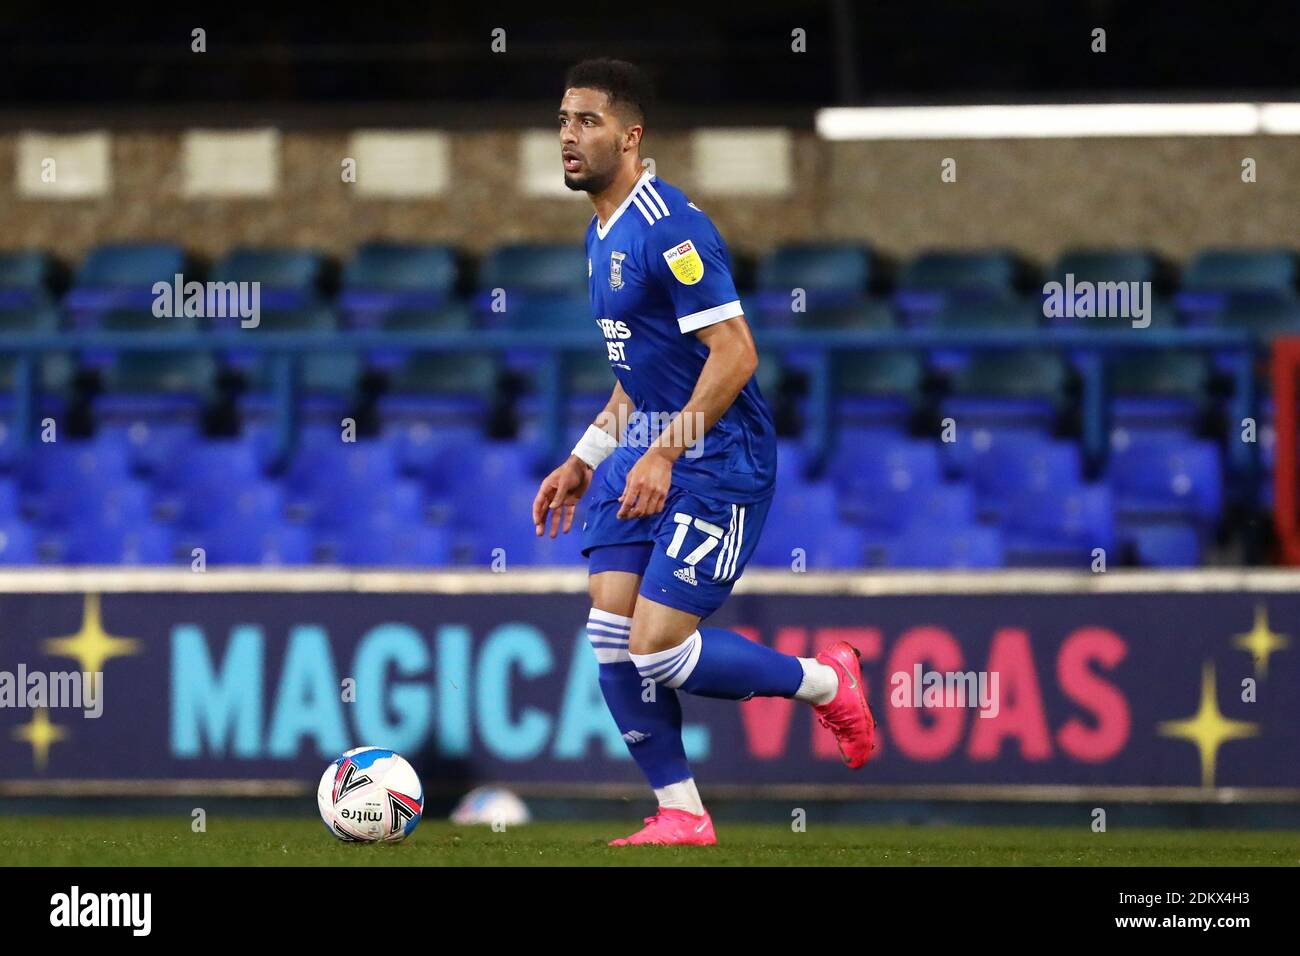 Keanan Bennetts of Ipswich Town - Ipswich Town v Burton Albion, Sky Bet League One, Portman Road, Ipswich, UK - 15th December 2020  Editorial Use Only - DataCo restrictions apply Stock Photo